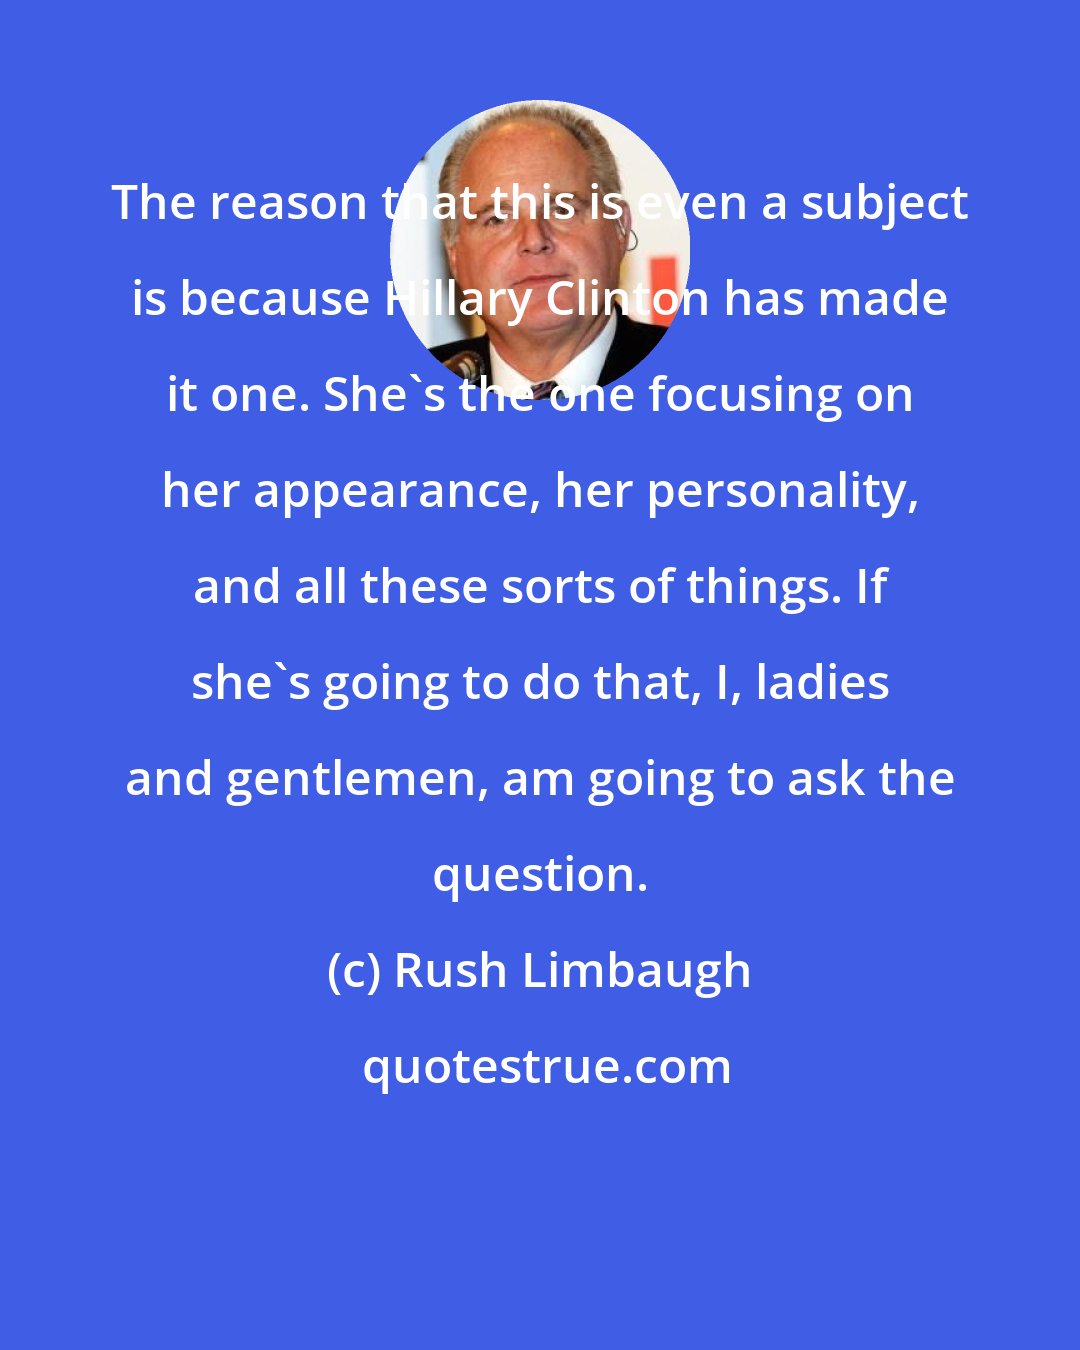 Rush Limbaugh: The reason that this is even a subject is because Hillary Clinton has made it one. She's the one focusing on her appearance, her personality, and all these sorts of things. If she's going to do that, I, ladies and gentlemen, am going to ask the question.